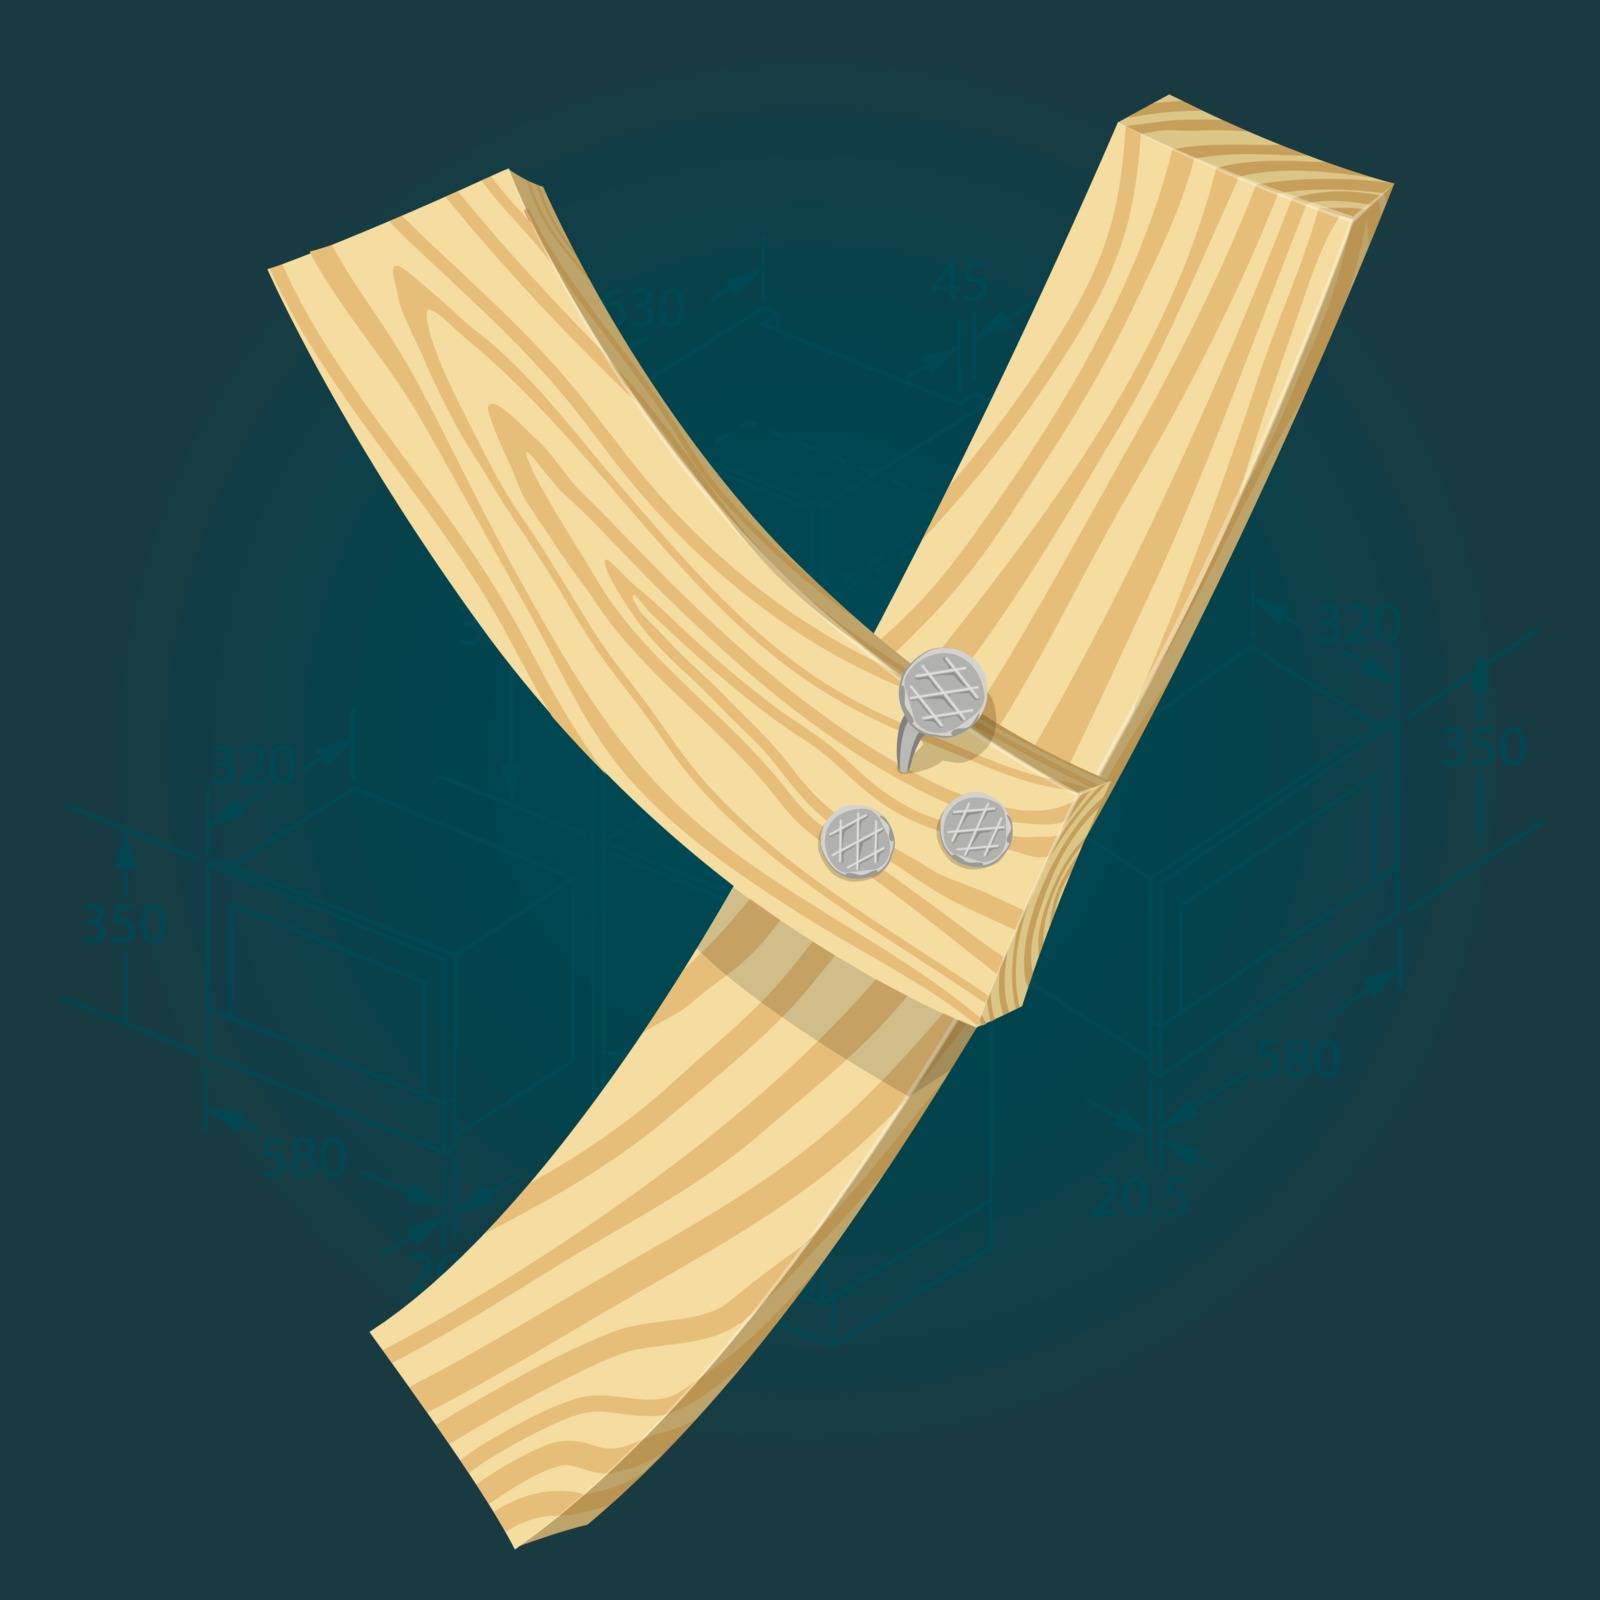 Letter Y - stylized vector font made from wooden planks hammered with iron nails.